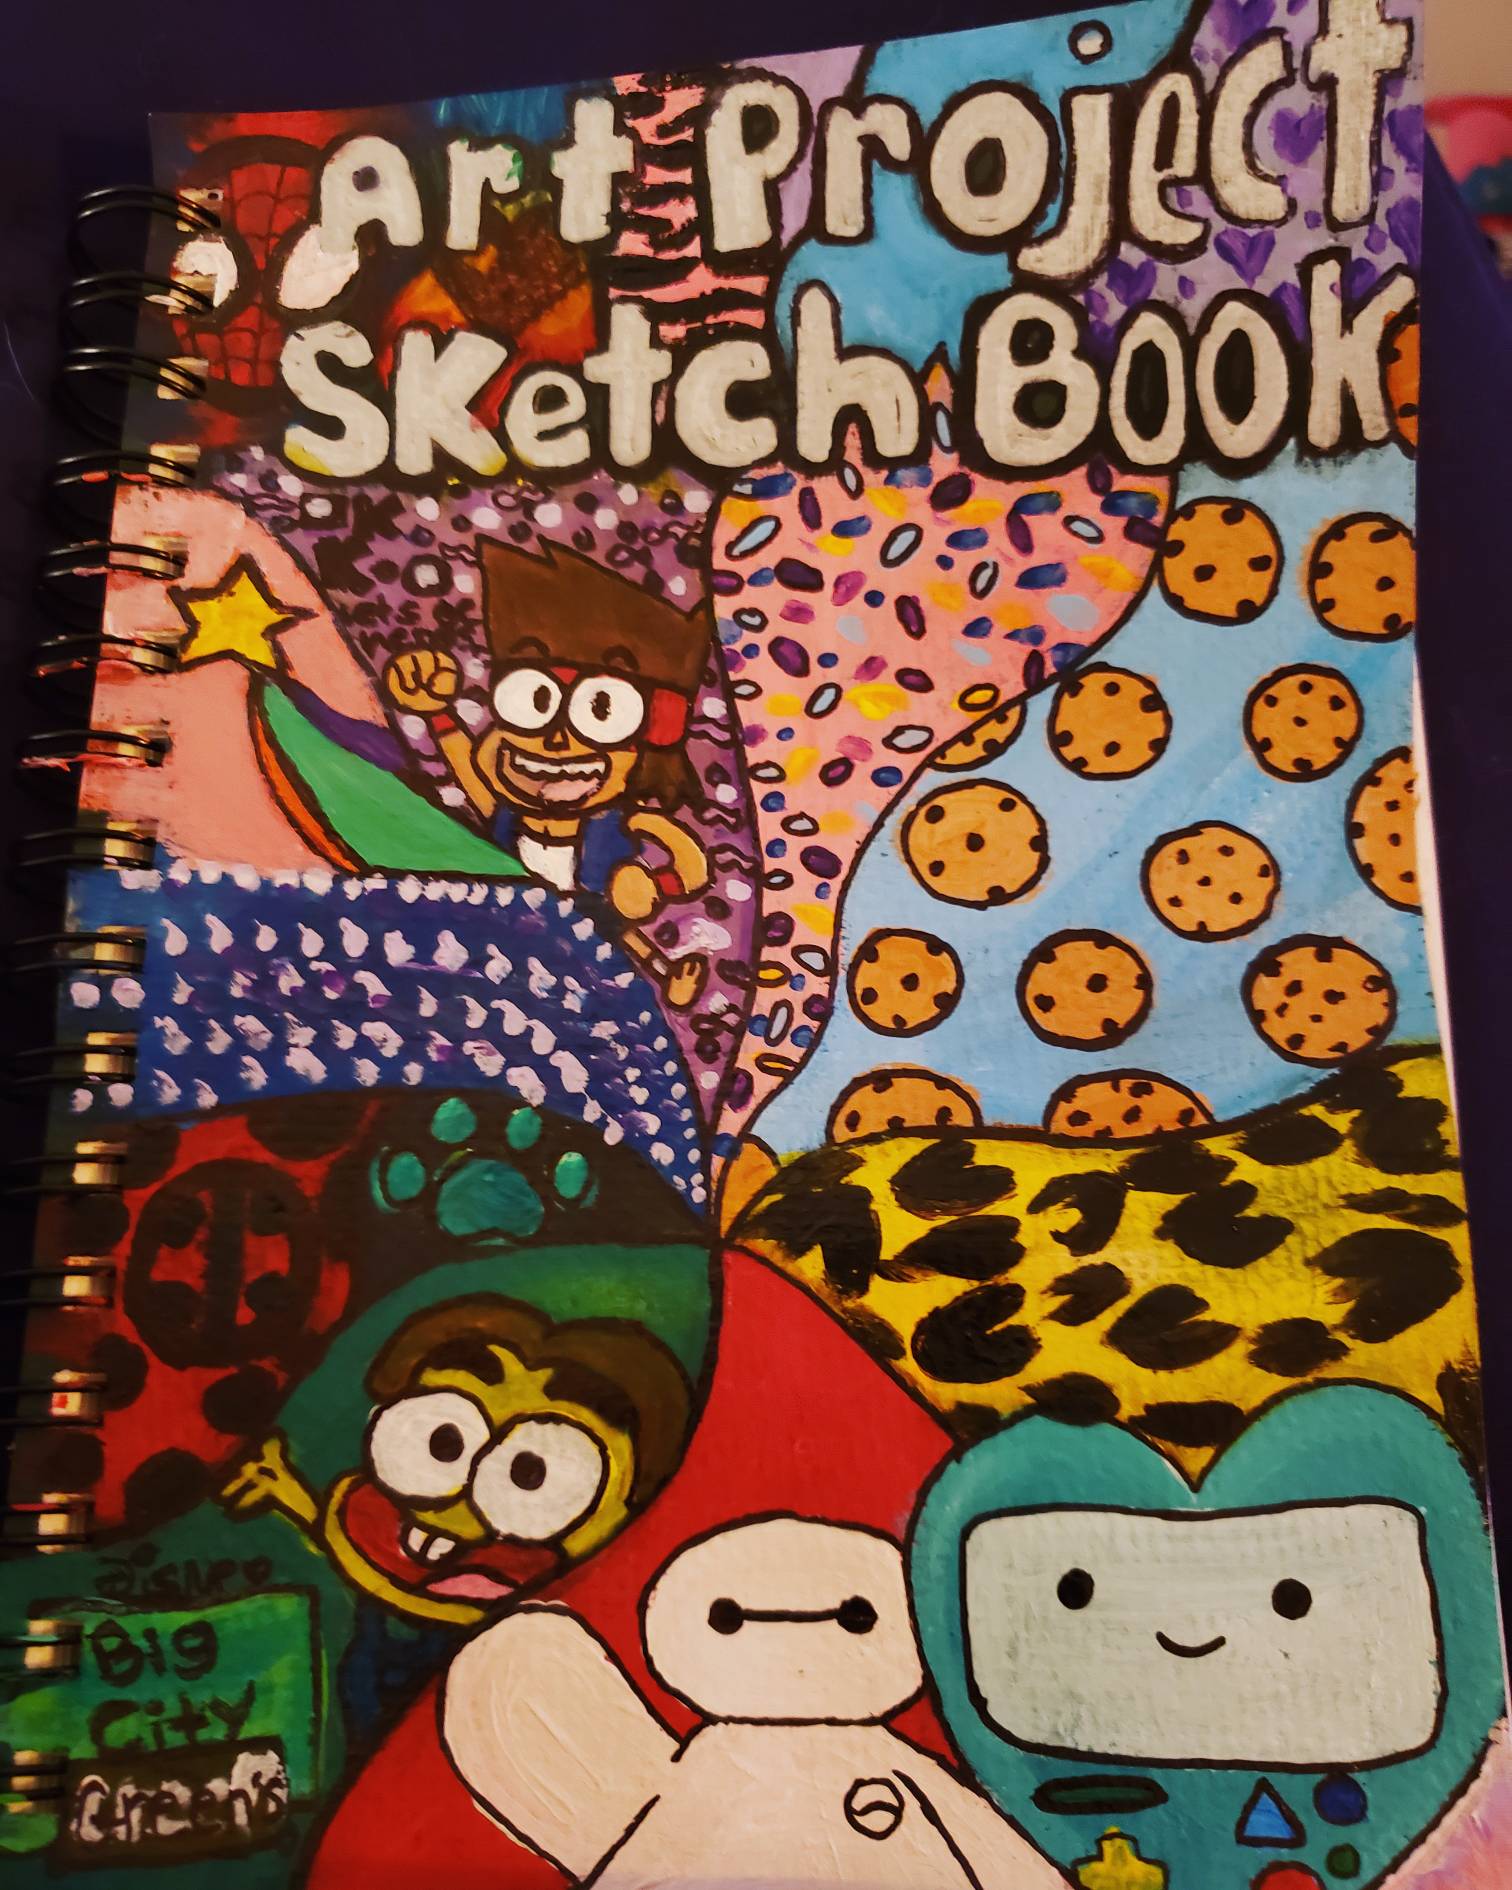 completed my sketchbook cover by princesscookiecat682 on DeviantArt